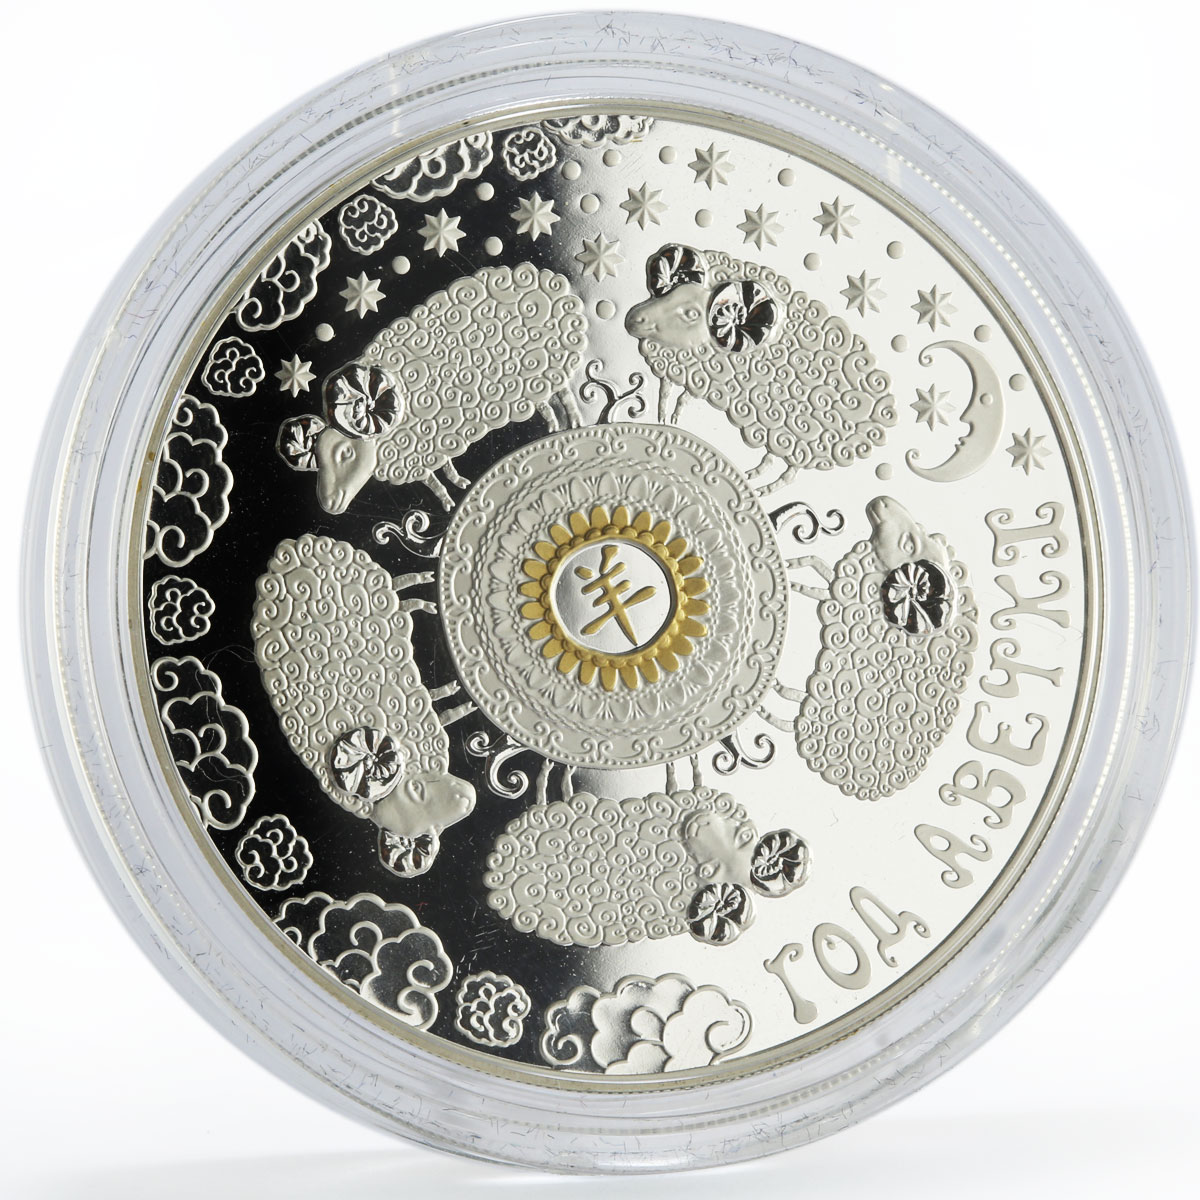 Belarus 20 rubles Lunar Calendar series Year of the Goat gilded silver coin 2014